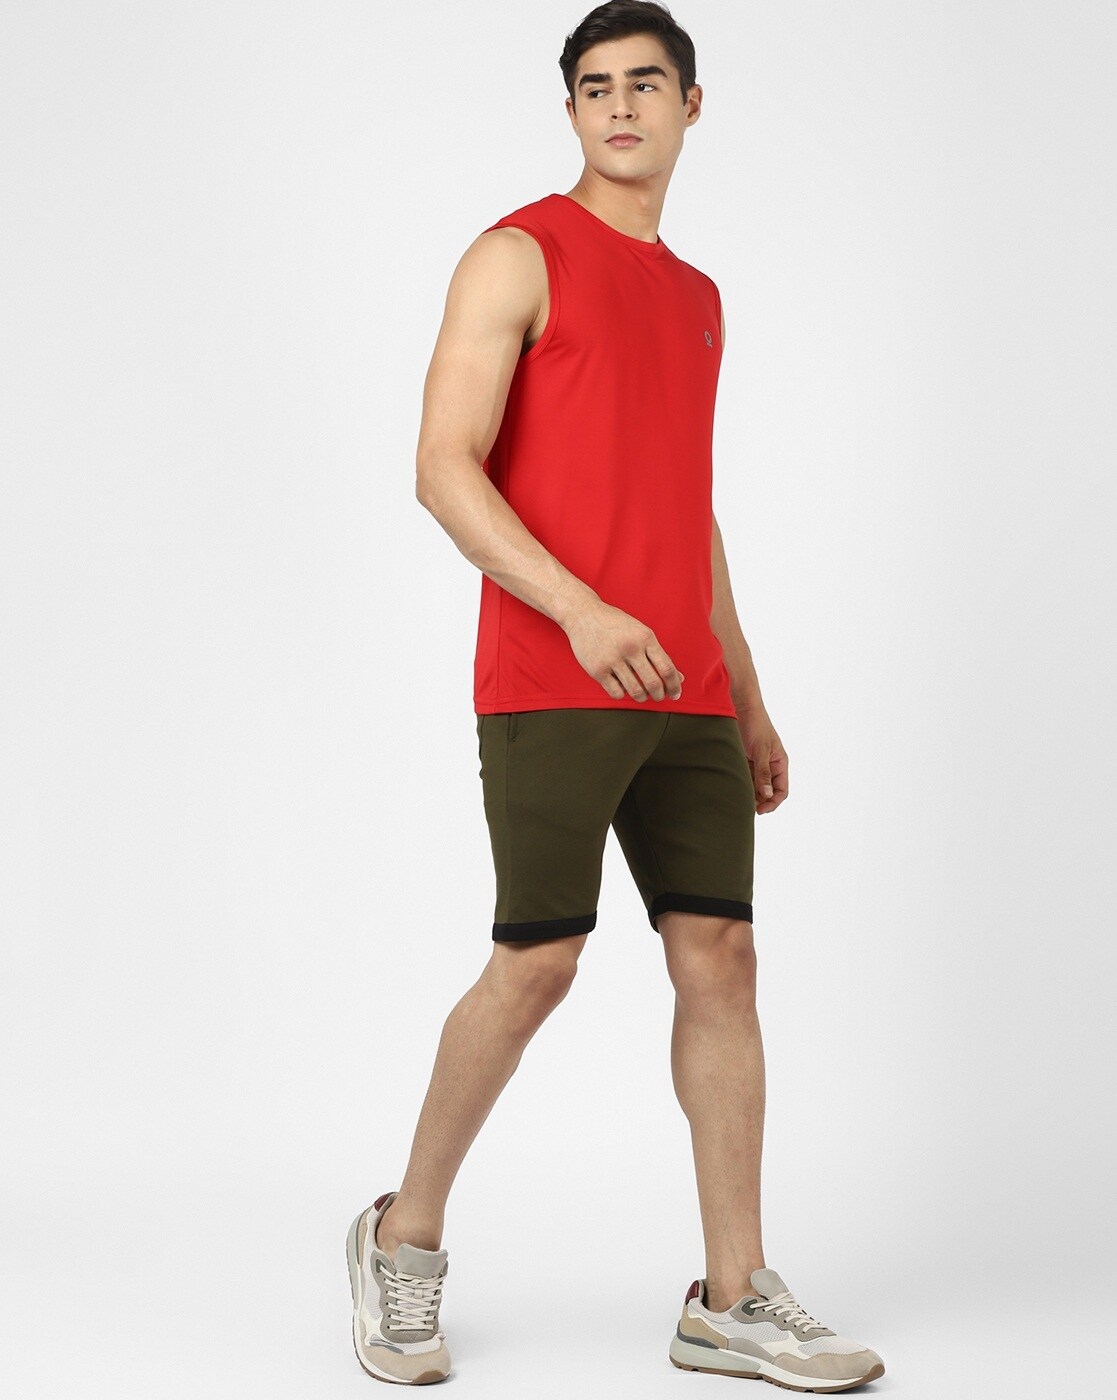 Buy The Row men red camisole top for $475 online on SV77, W151W1041